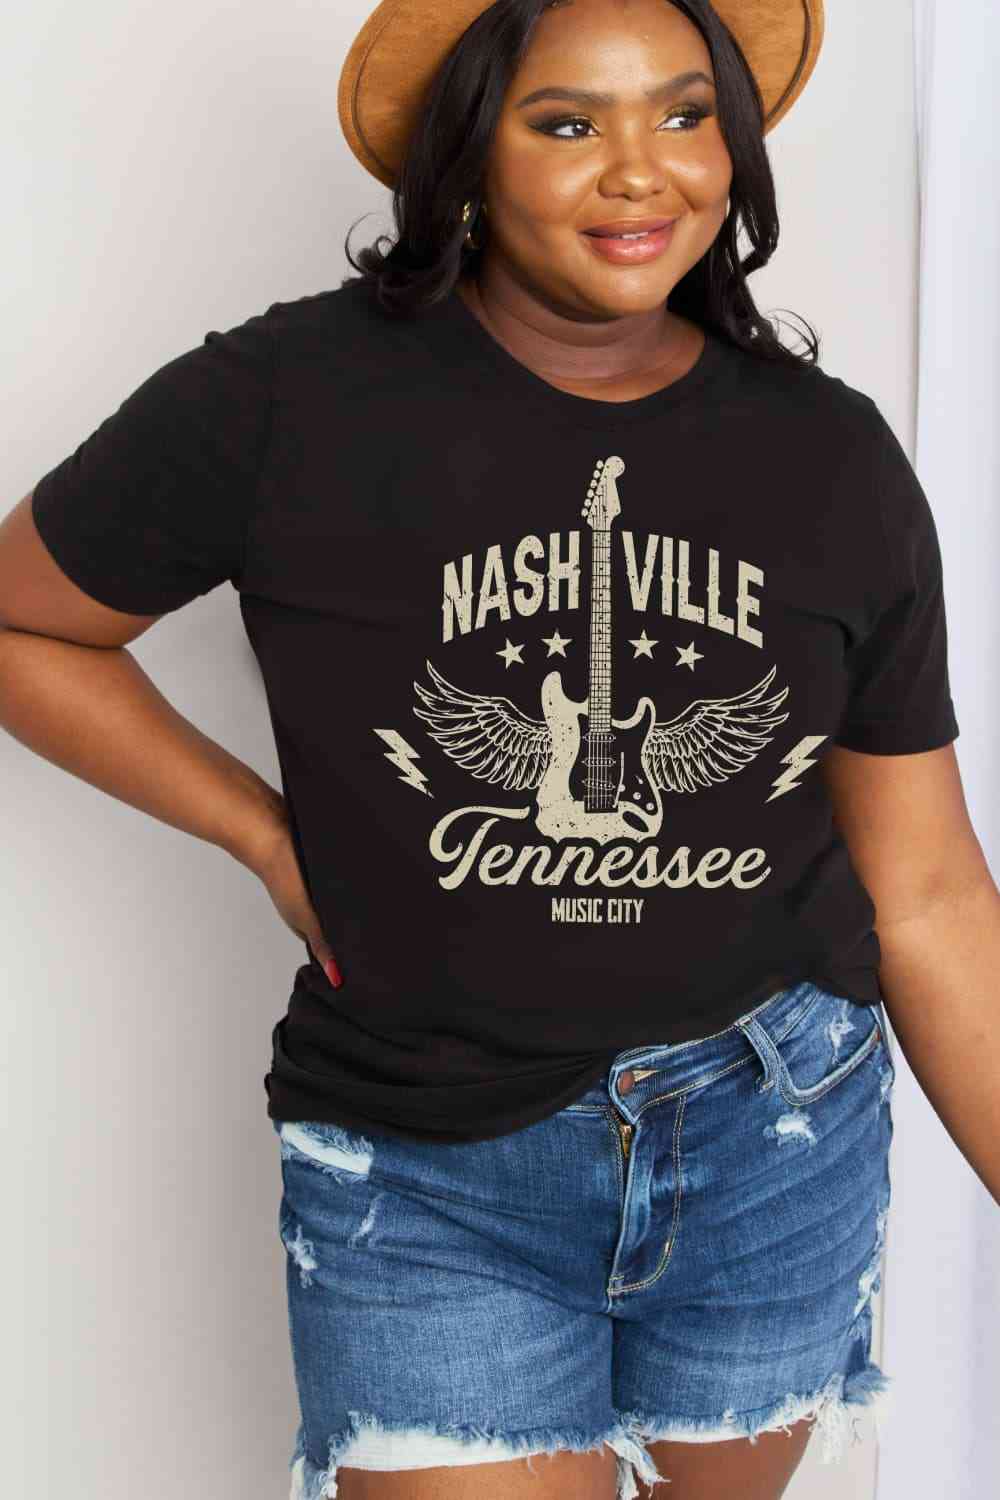 NASHVILLE TENNESSEE MUSIC CITY Graphic Cotton Tee - T-Shirts - Shirts & Tops - 9 - 2024